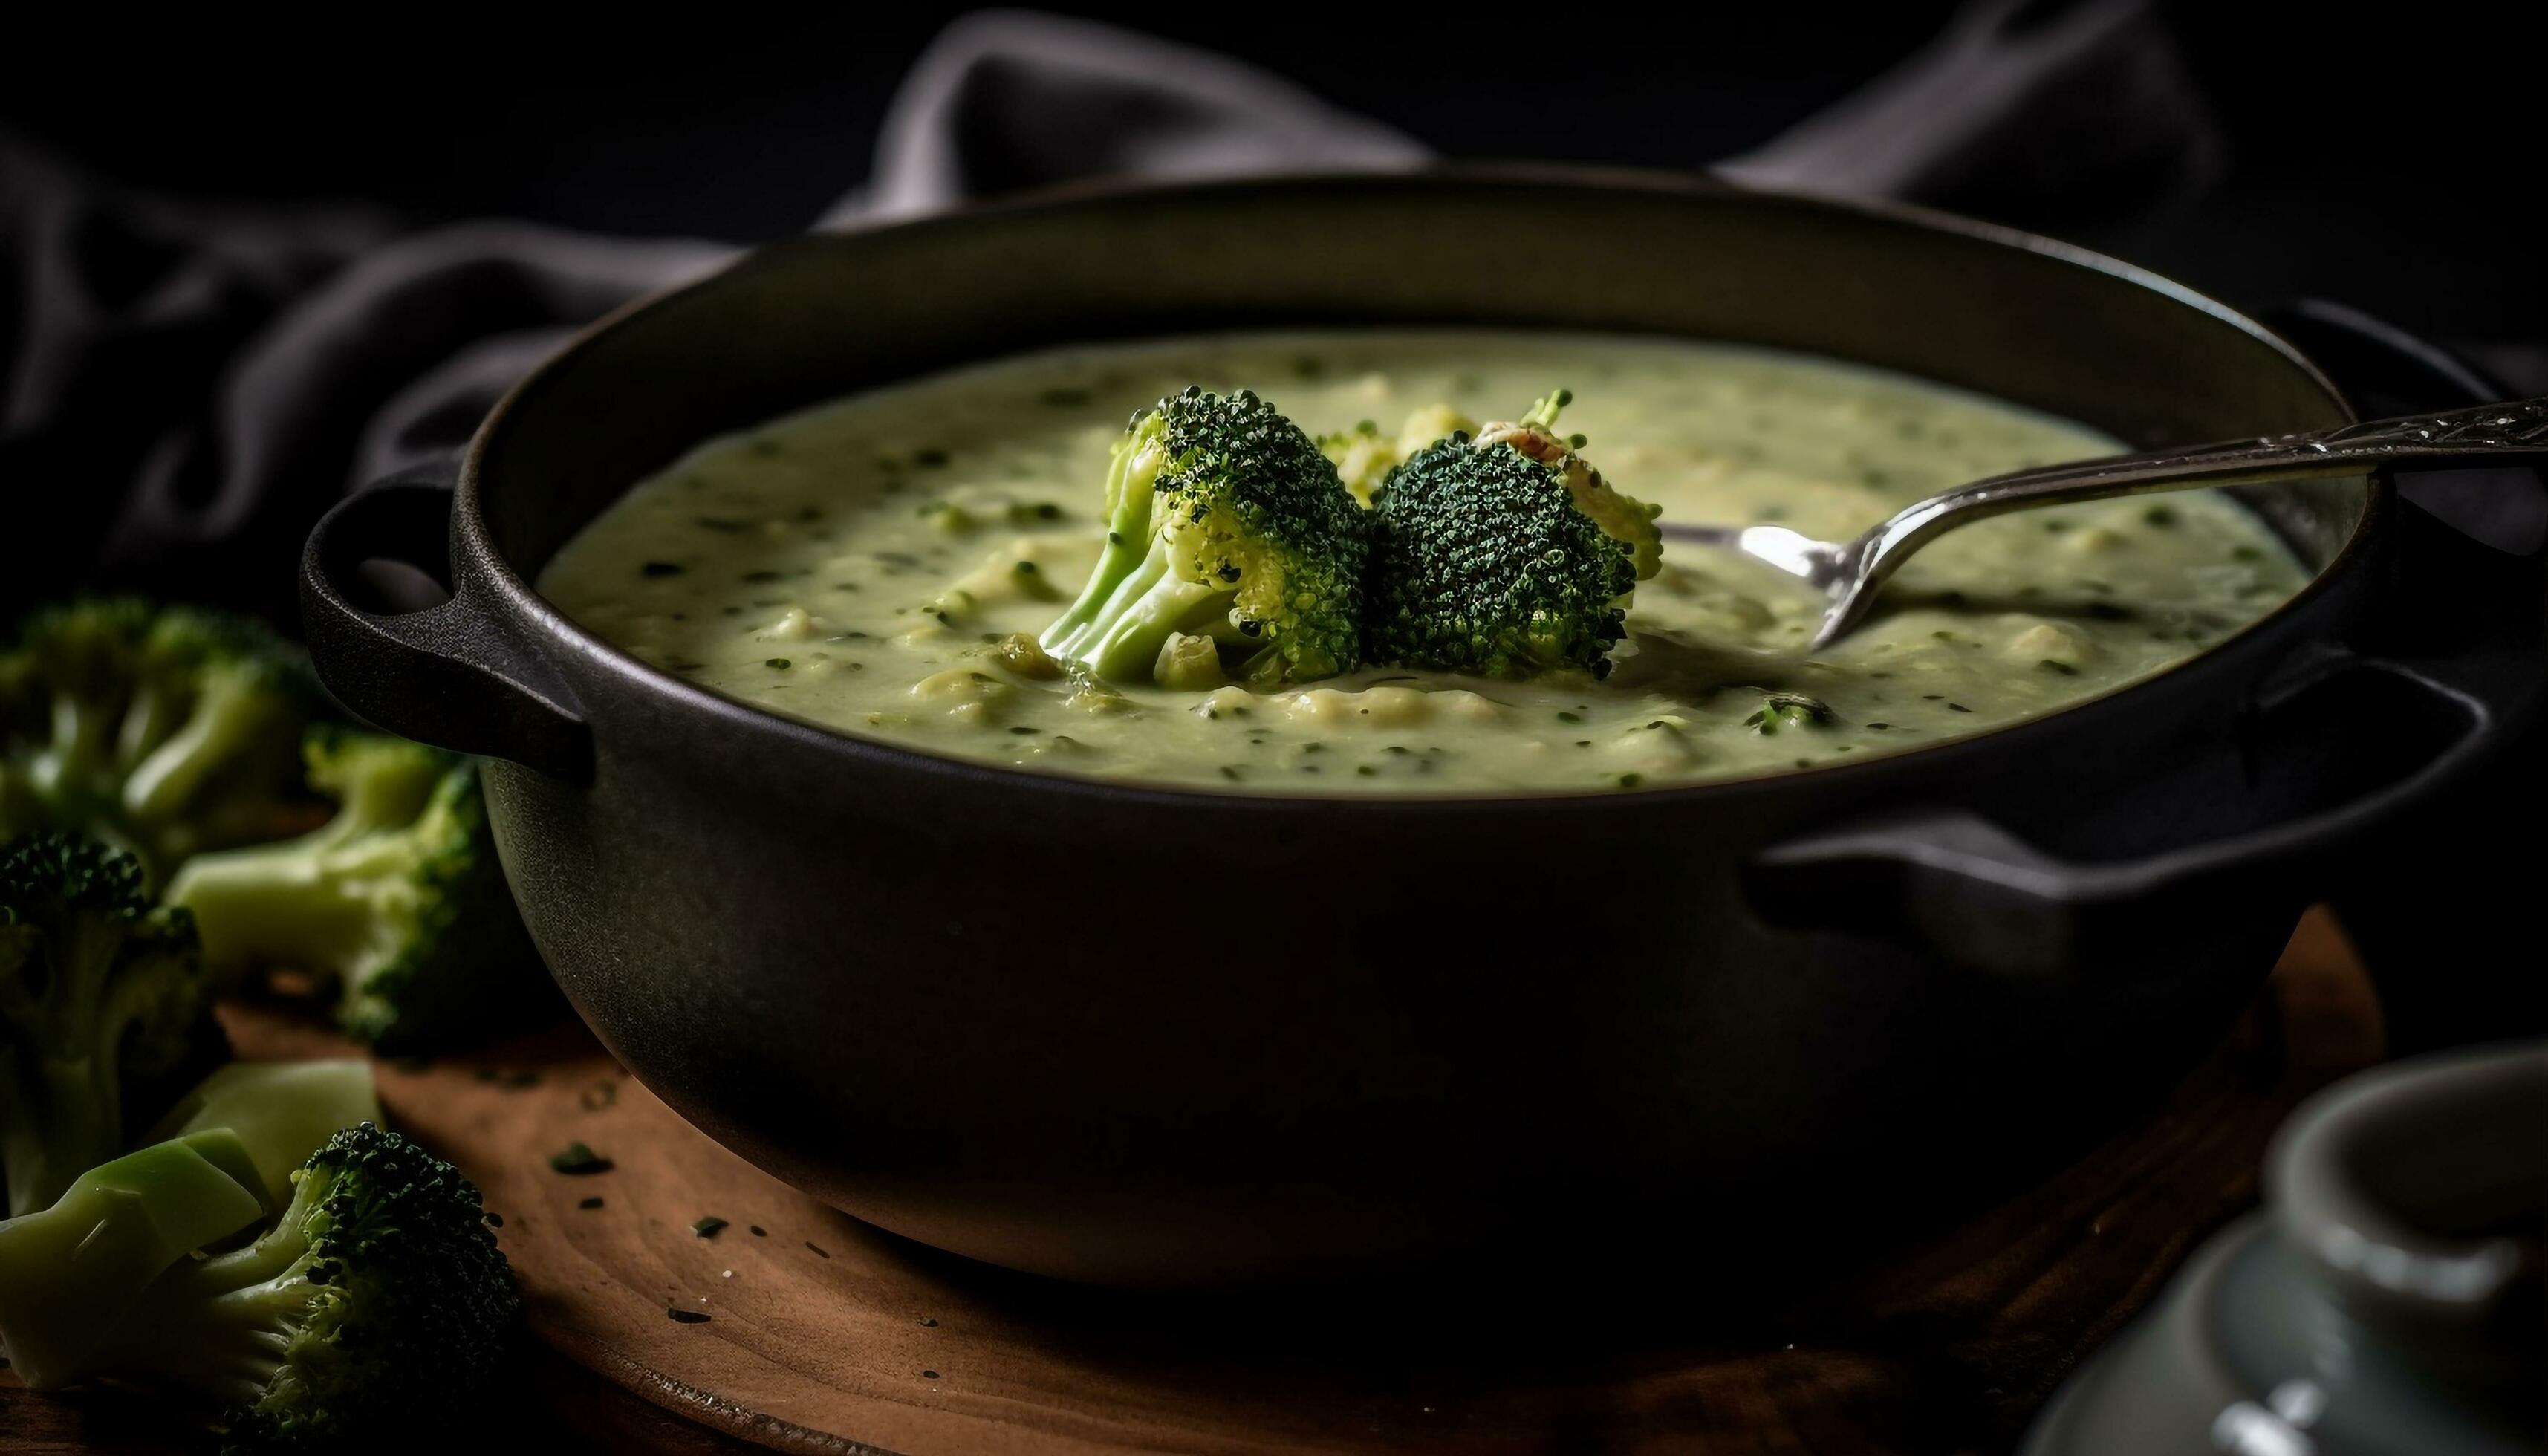 https://static.vecteezy.com/system/resources/previews/026/420/247/large_2x/healthy-vegetarian-soup-with-fresh-broccoli-and-homemade-cream-ready-to-eat-generated-by-ai-free-photo.jpg